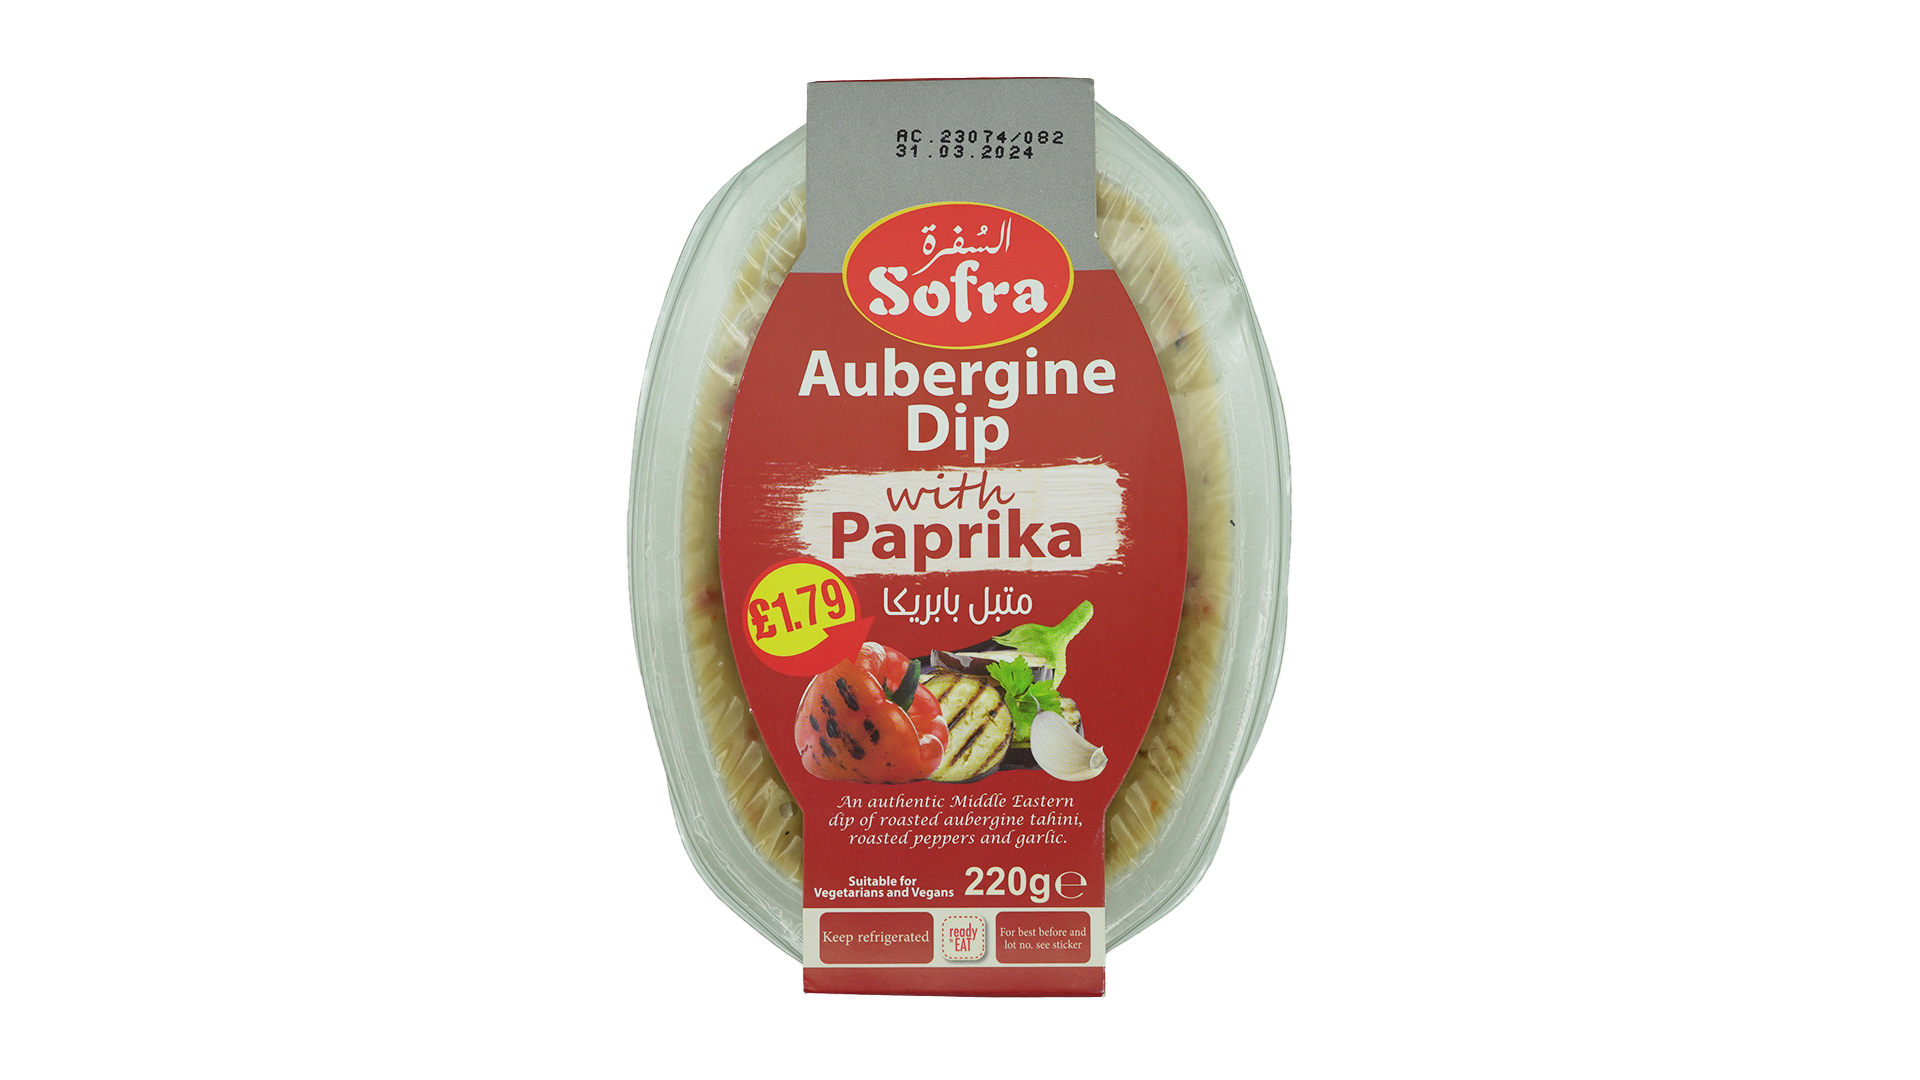 Sofra aubergine dip with paprika 220g 1